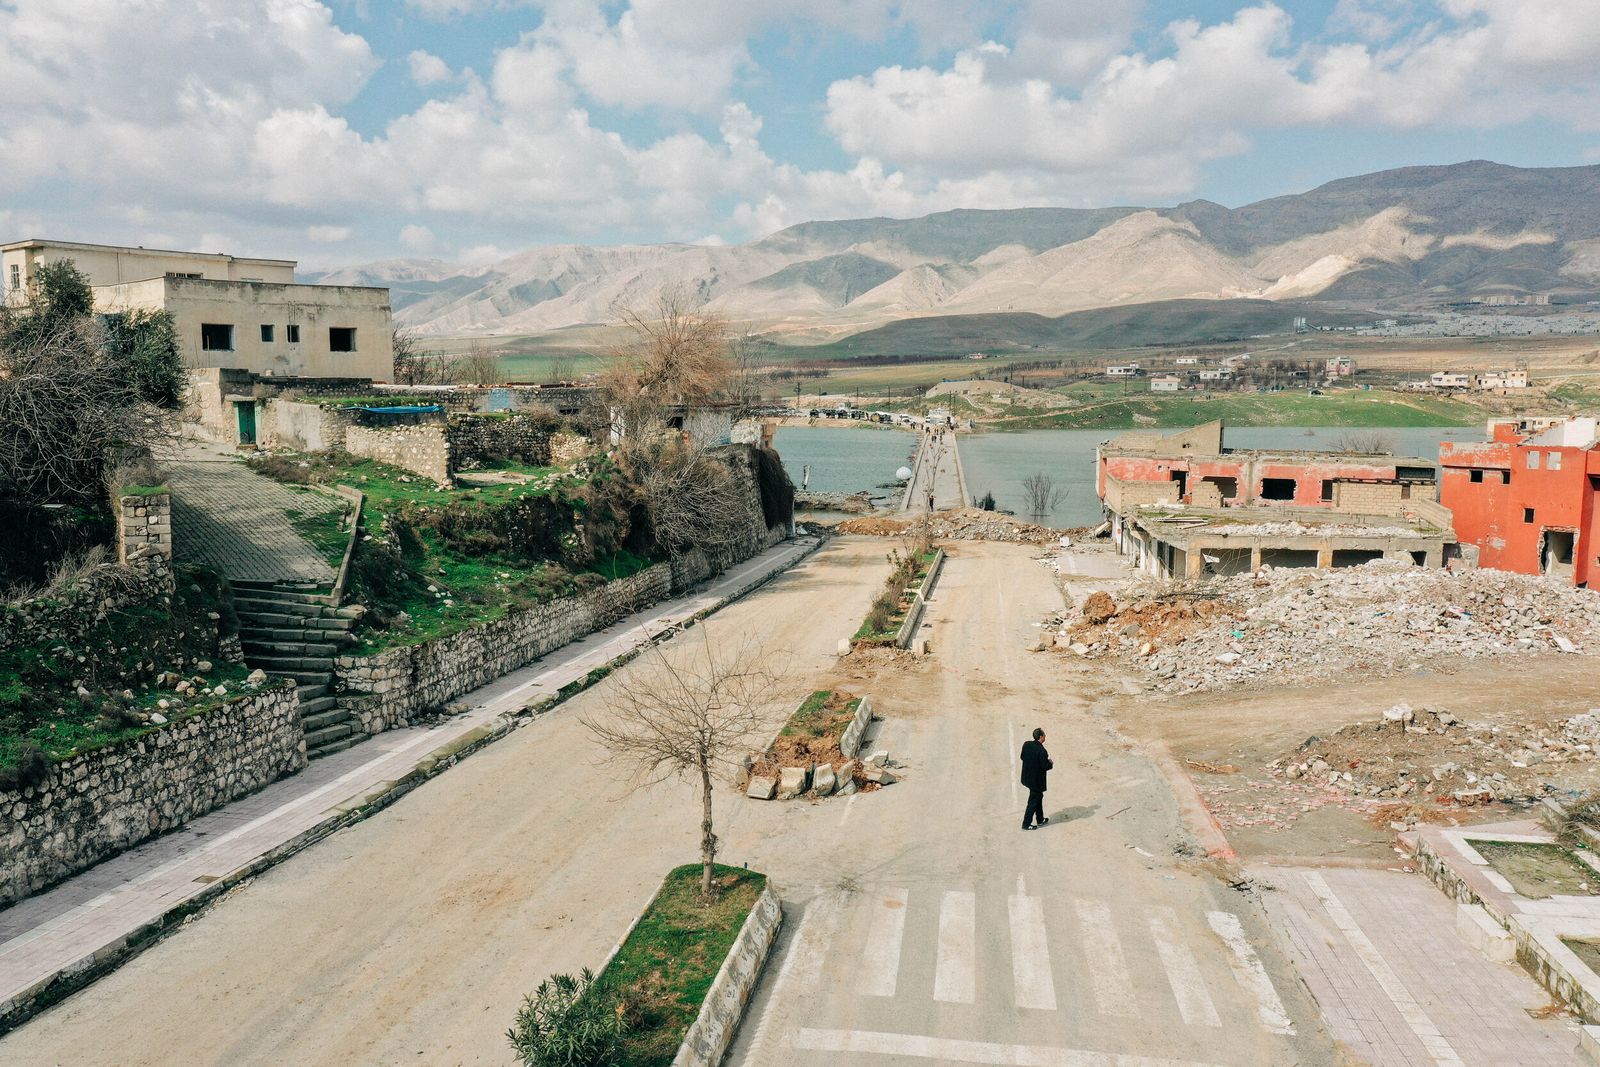 © Hussain Alsaden - Image from the Hasankeyf photography project